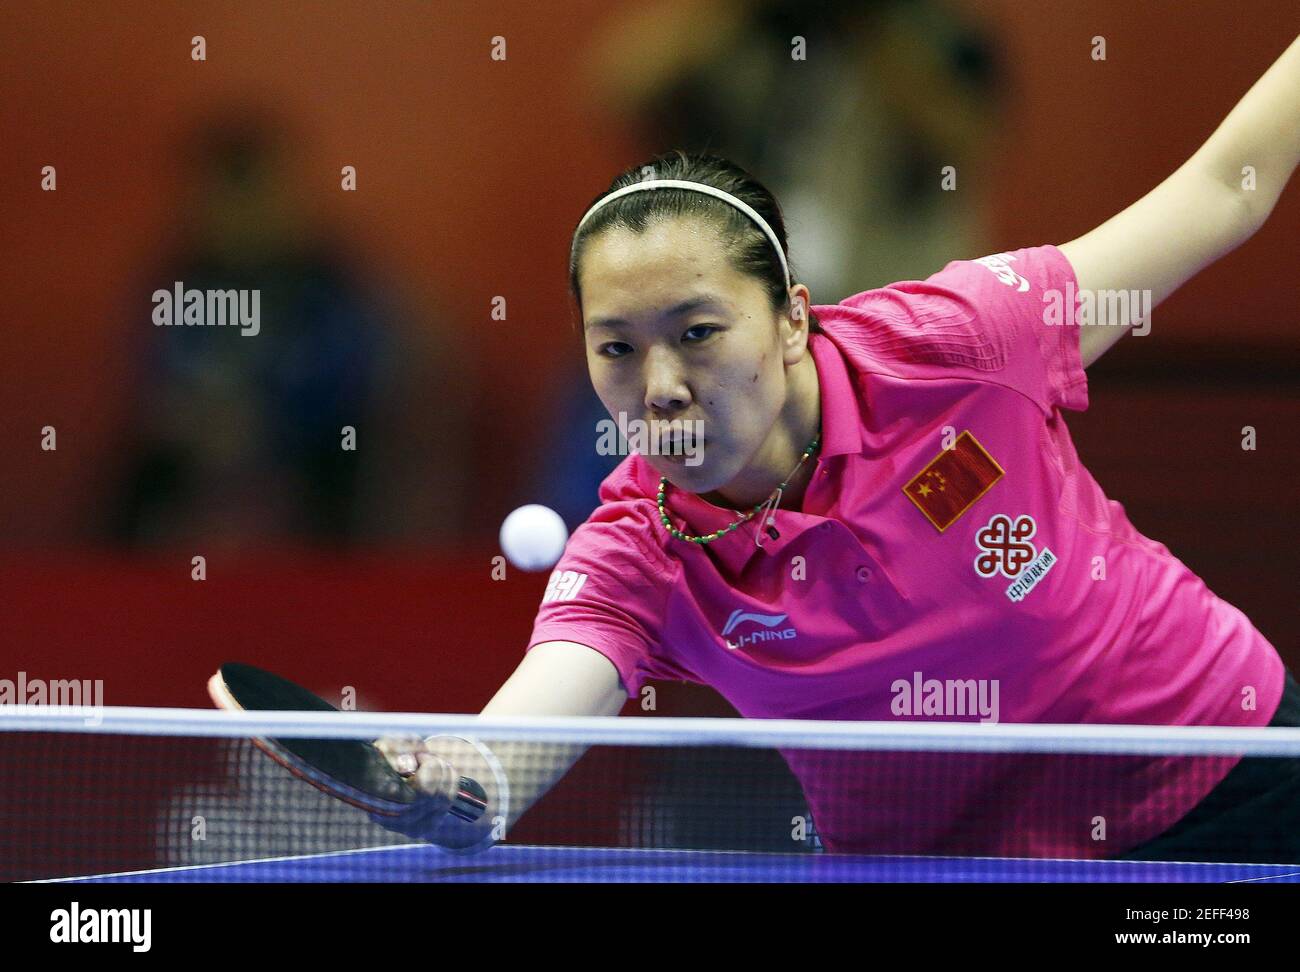 Table Tennis - 2016 World Table Tennis Championships - Women's Semi-Finals - Kuala Lumpur, Malaysia - 5/3/16 - Li Xiaoxia of China competes. REUTERS/Olivia Harris   Picture Supplied by Action Images Stock Photo